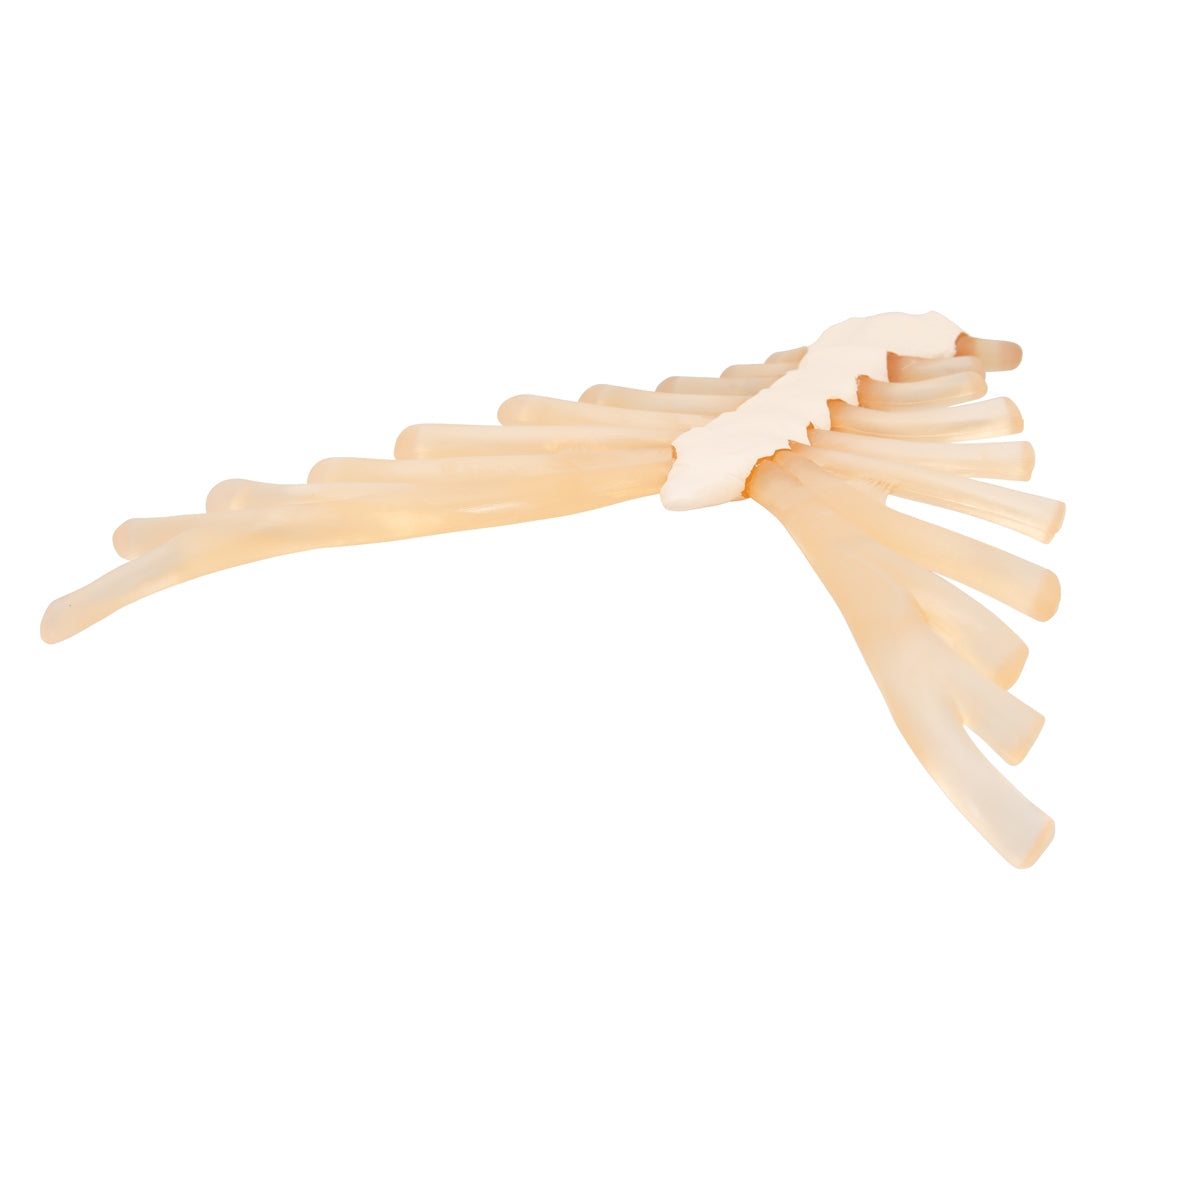 Human Sternum Model with Rib Cartilage